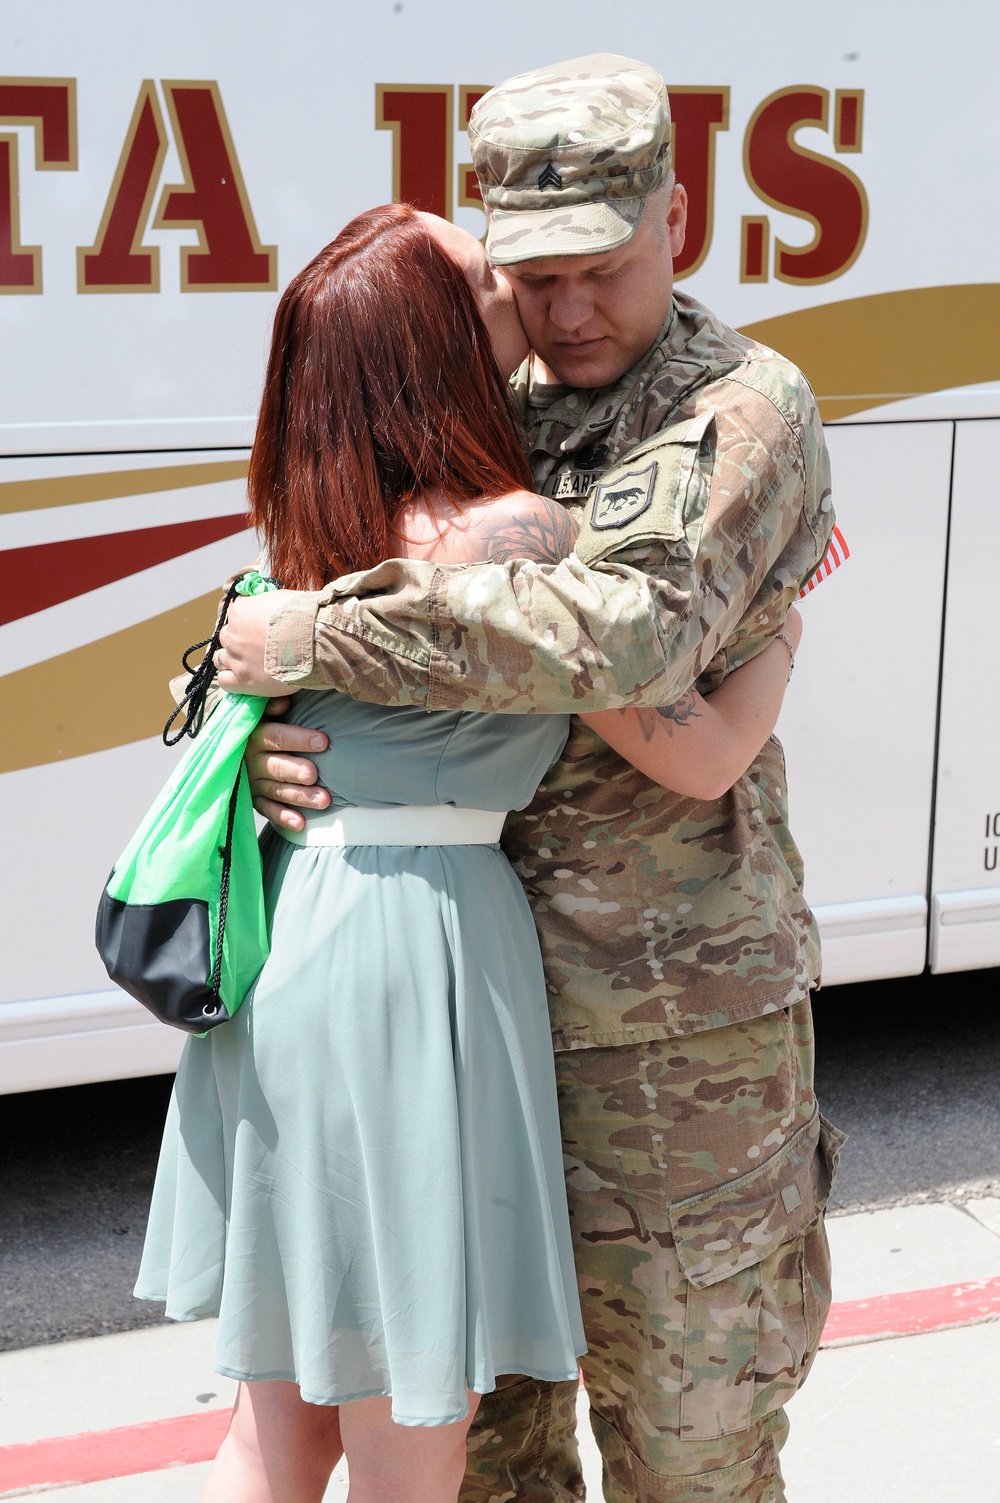 155th Soldiers welcomed home from Kuwait deployment